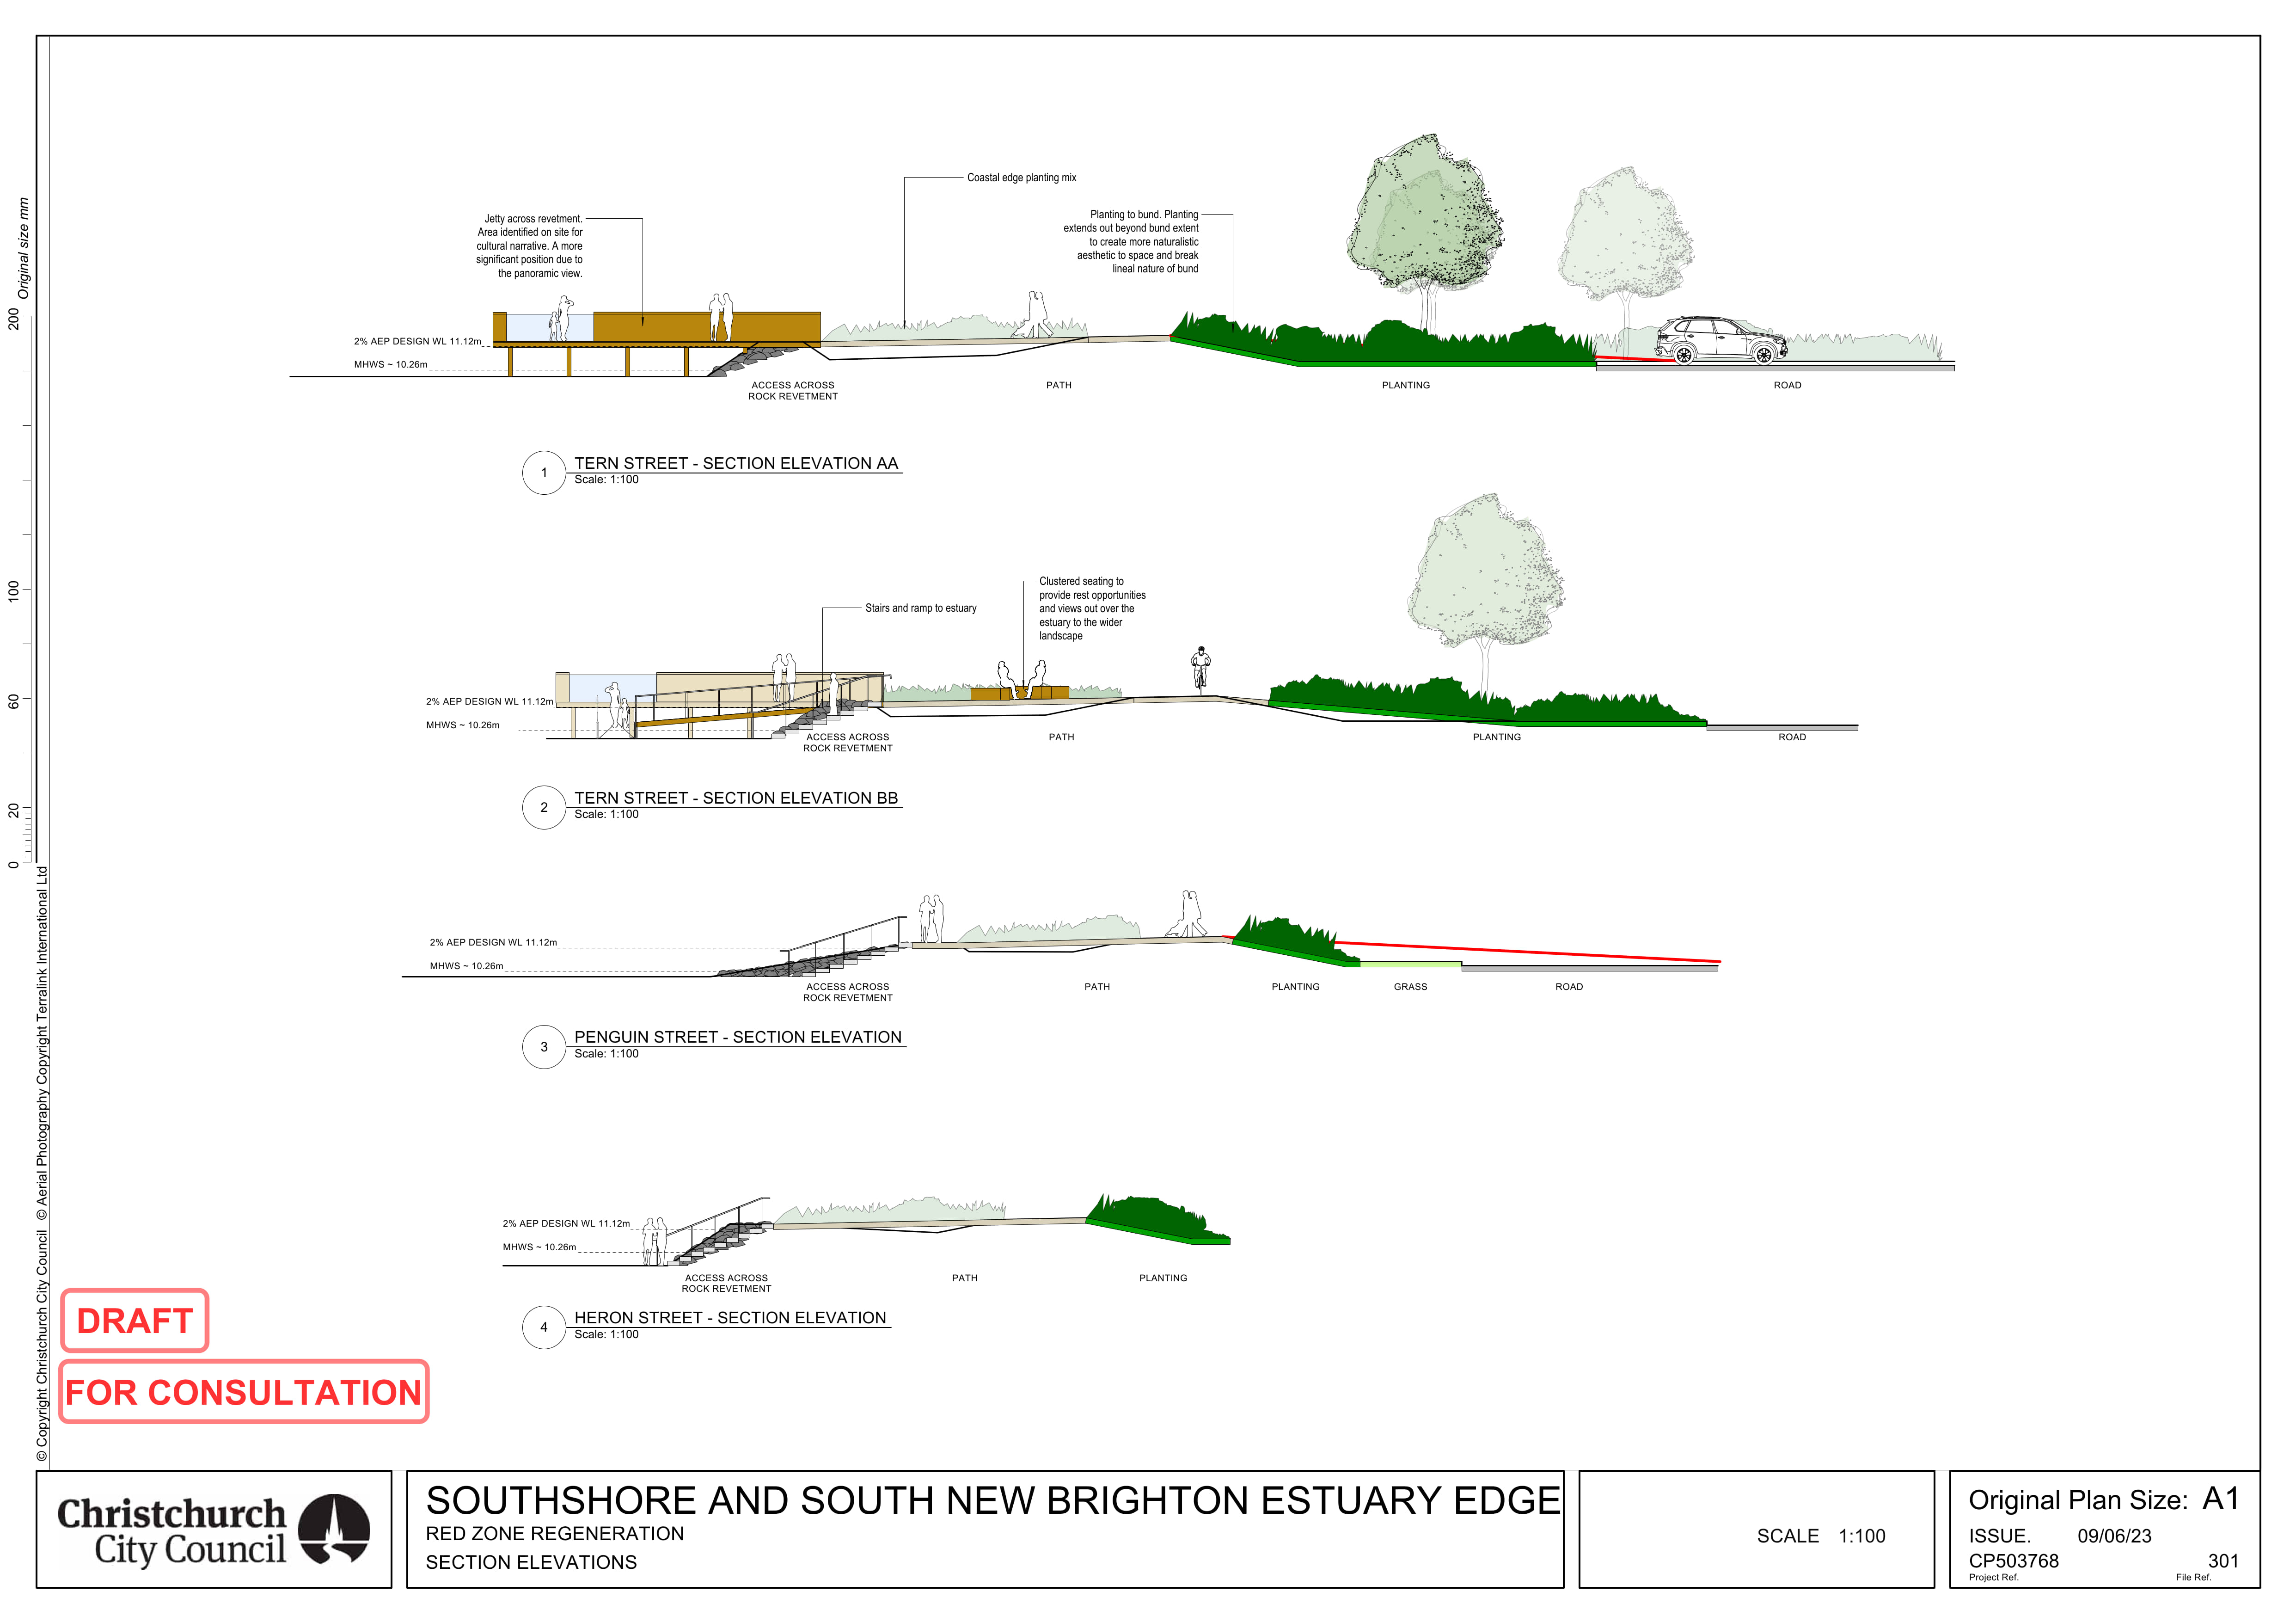 Heron, Penguin and Tern streets – design of estuary access